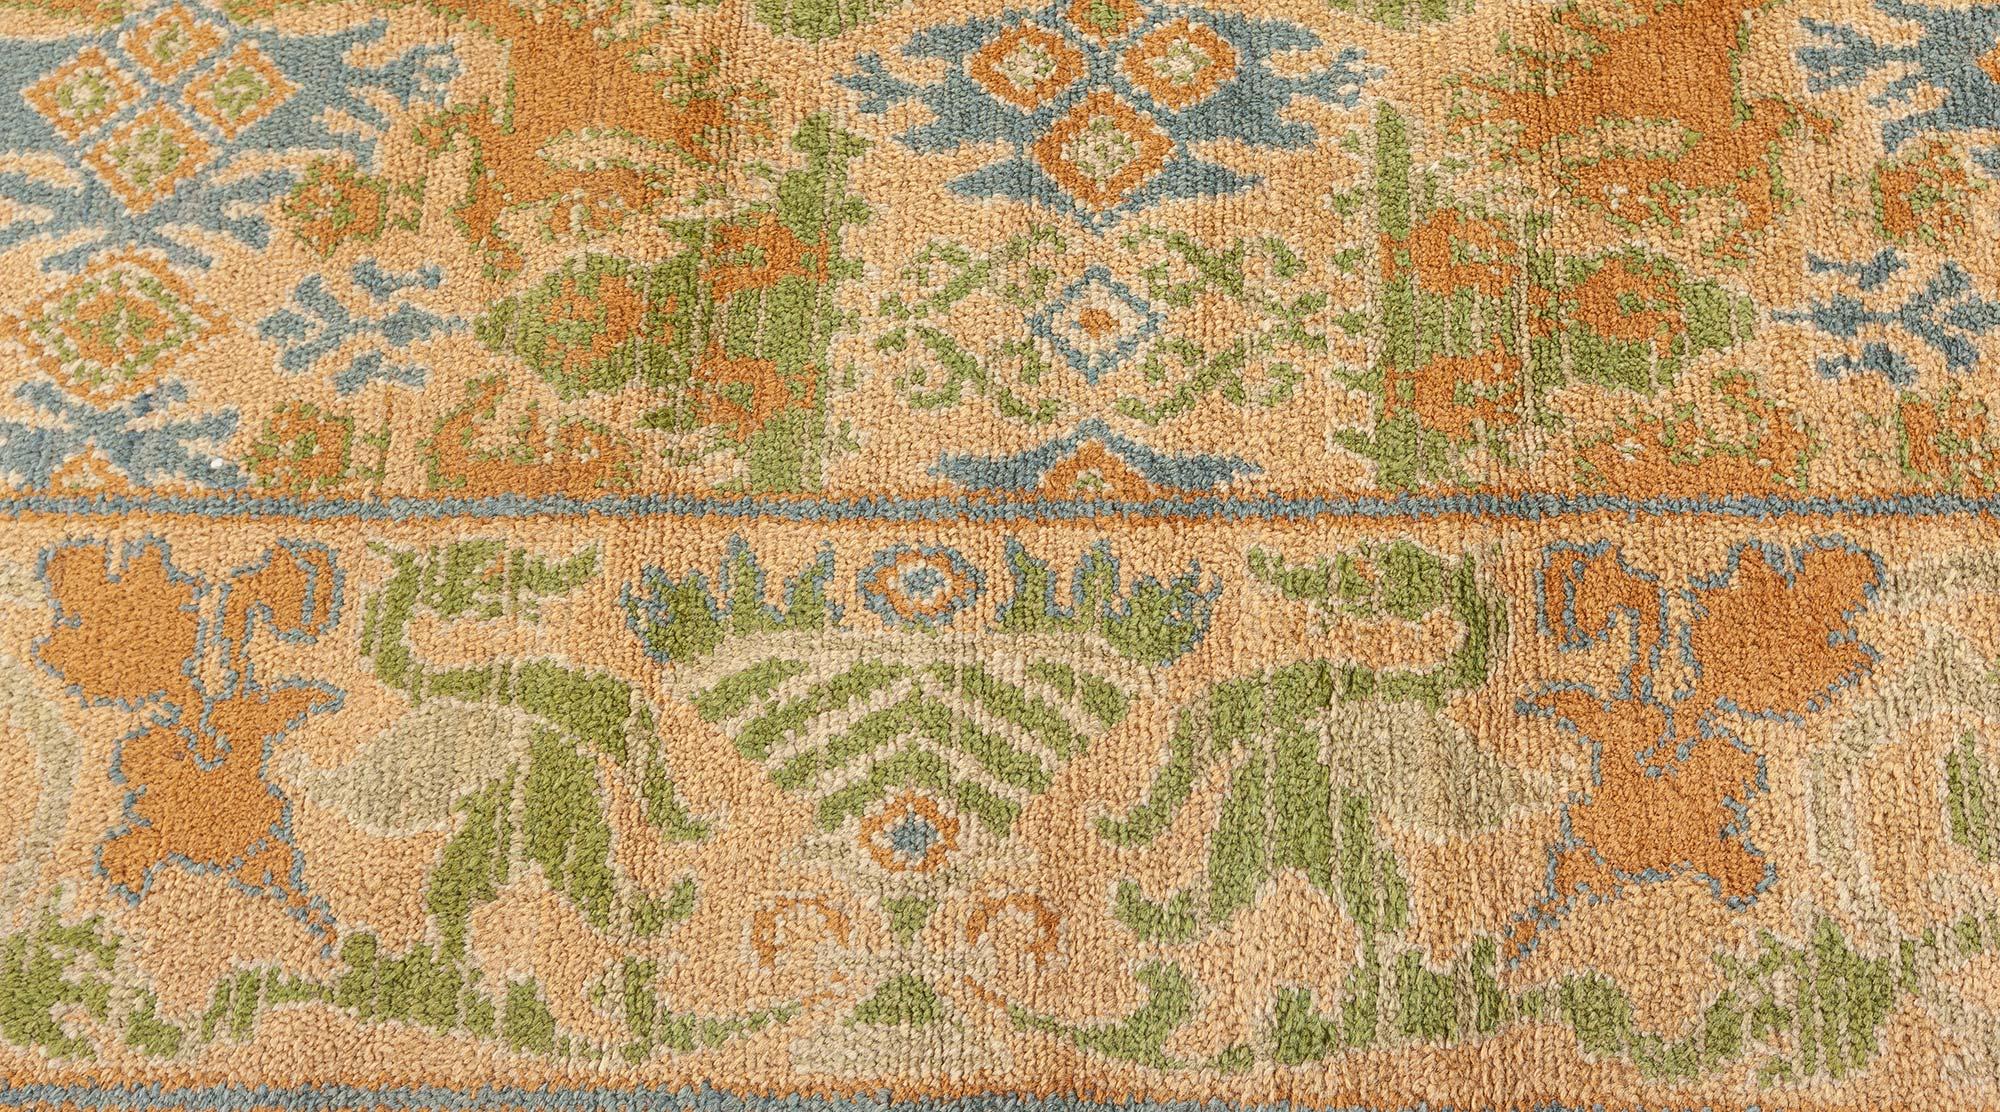 Vintage Spanish Rug in Yellow, Blue and Green In Good Condition For Sale In New York, NY